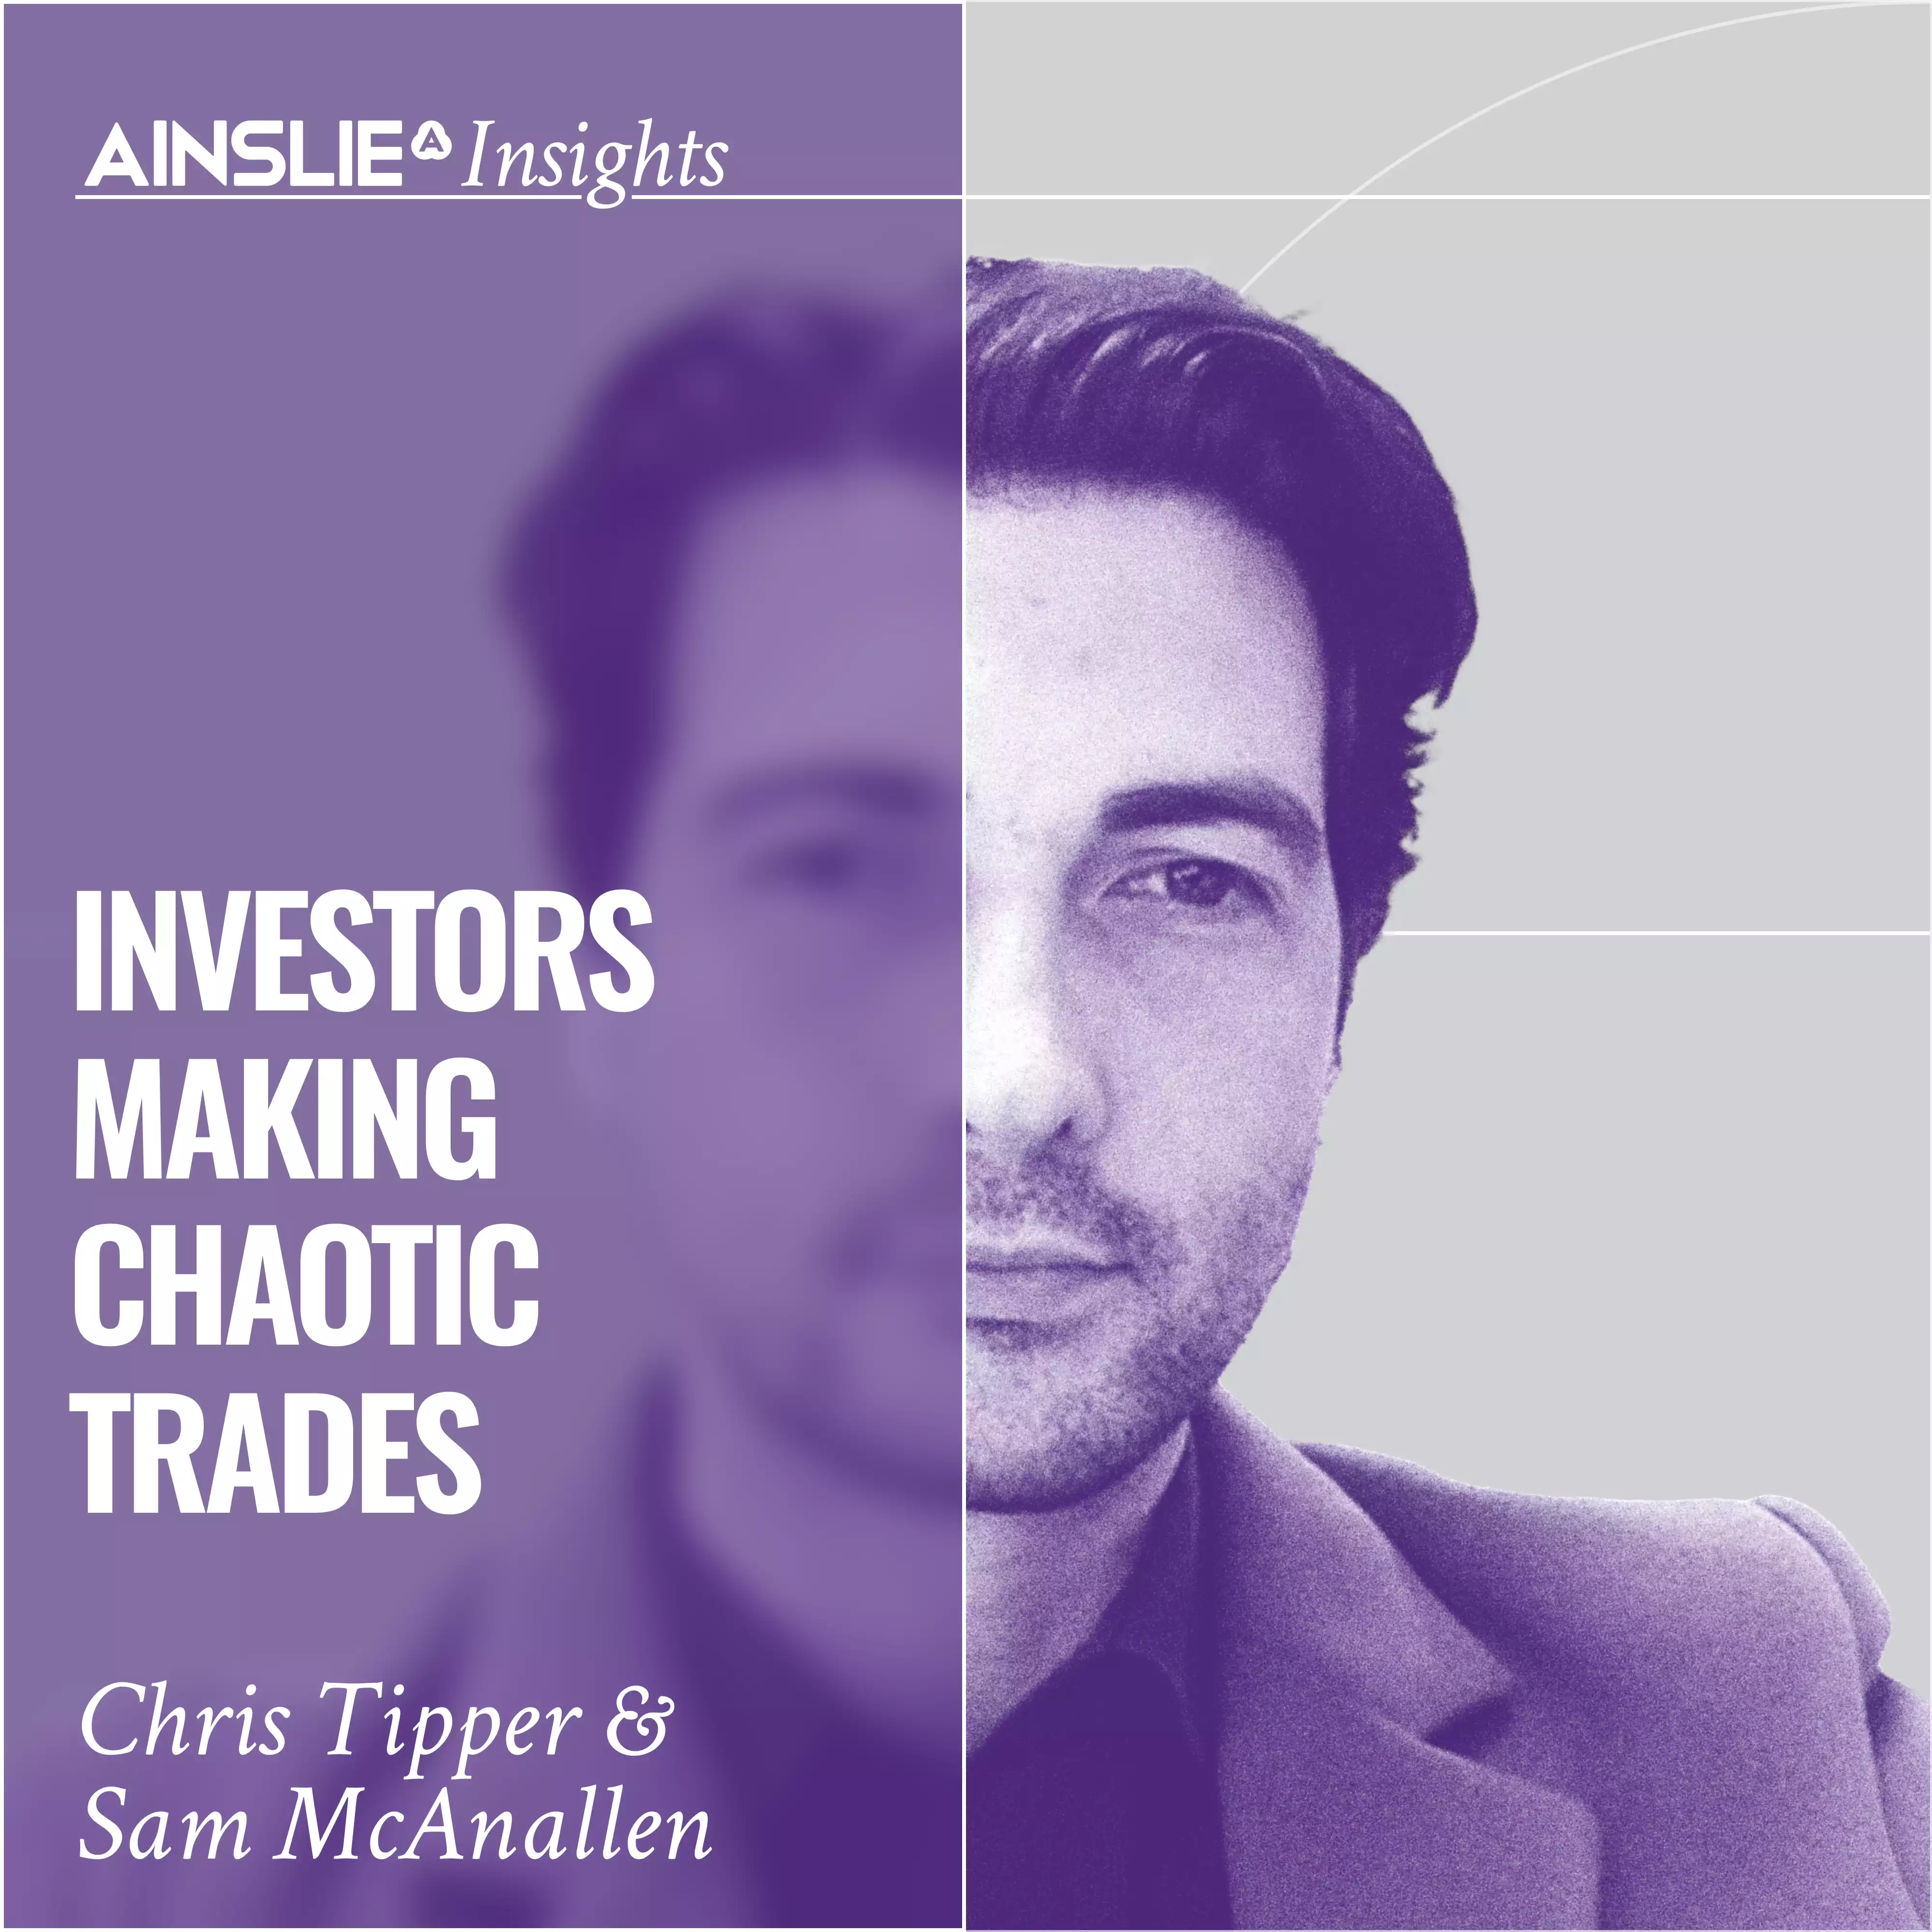 INSIGHTS: Investors are Making Chaotic Trades